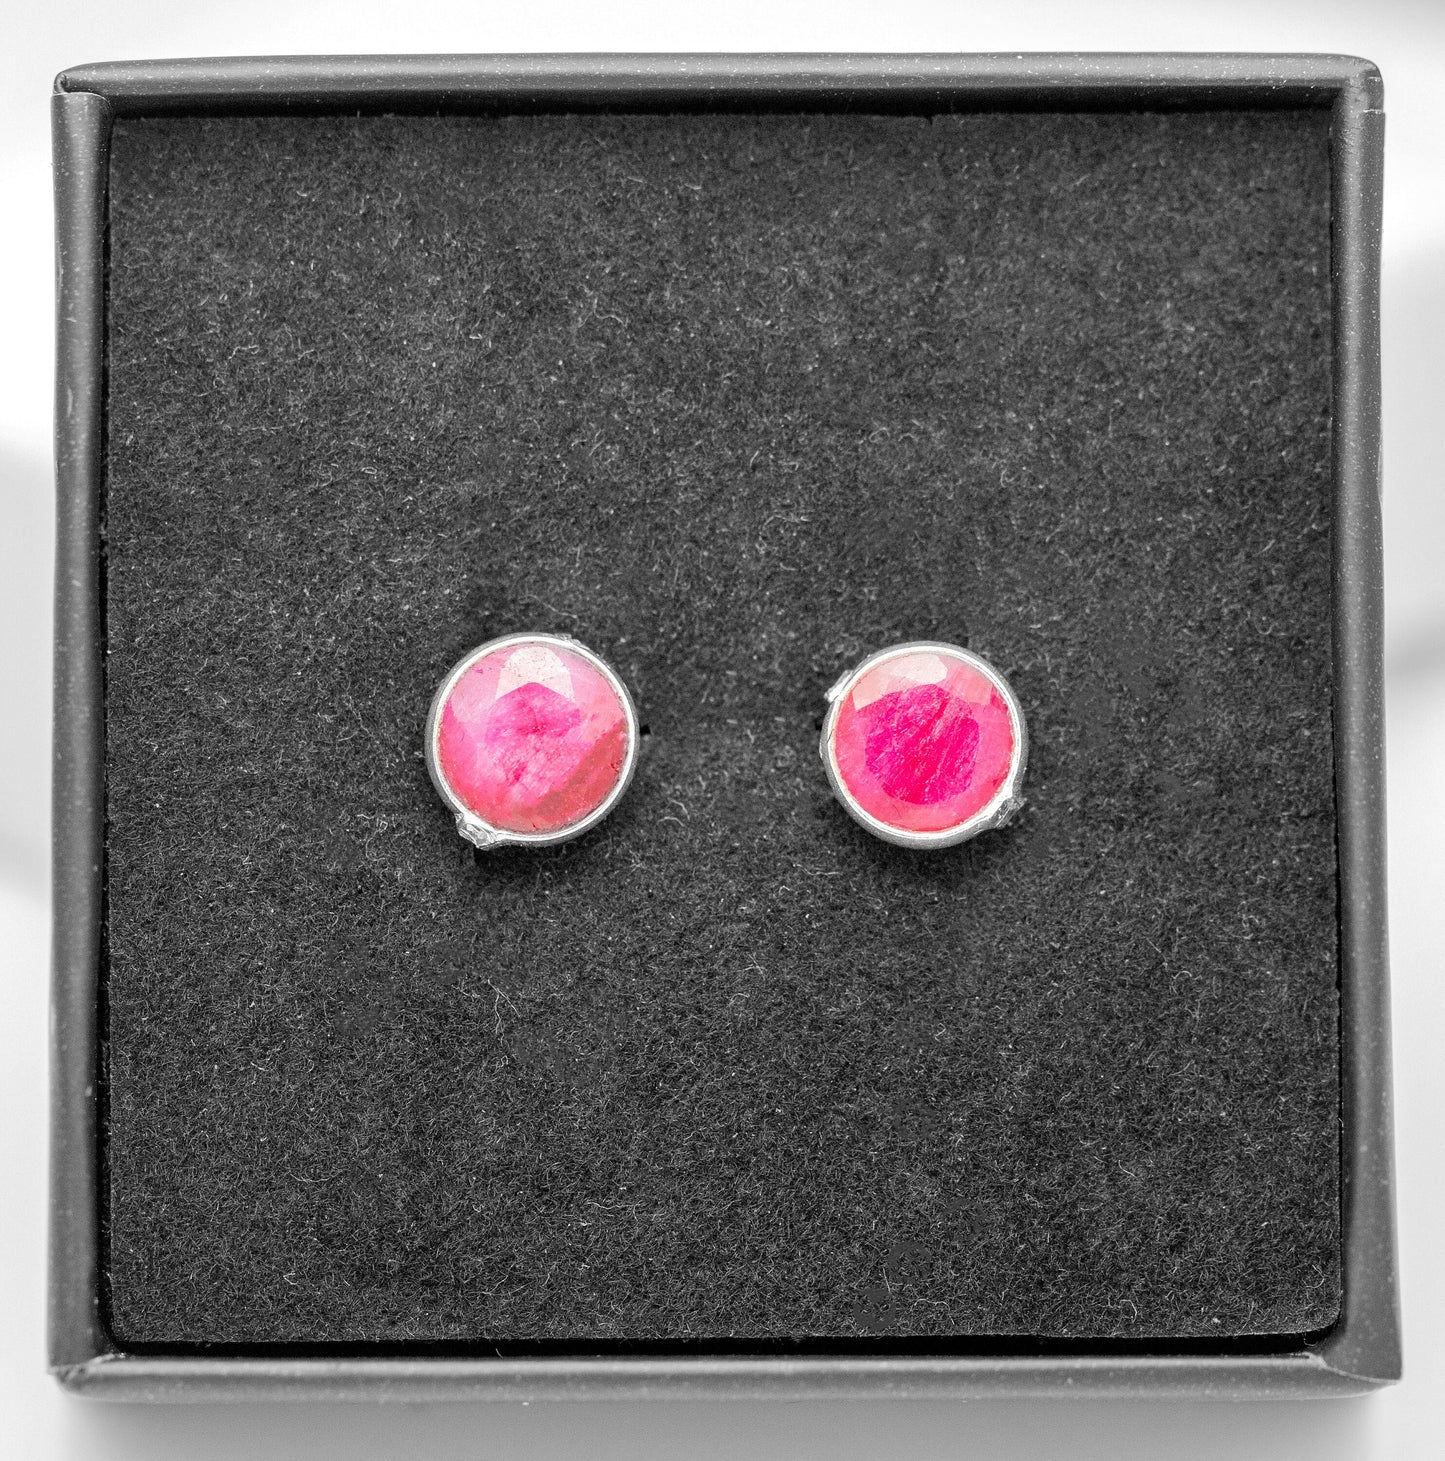 Genuine 925 Sterling Silver Red Ruby Earrings Round Button Studs Gemstone Jewellery